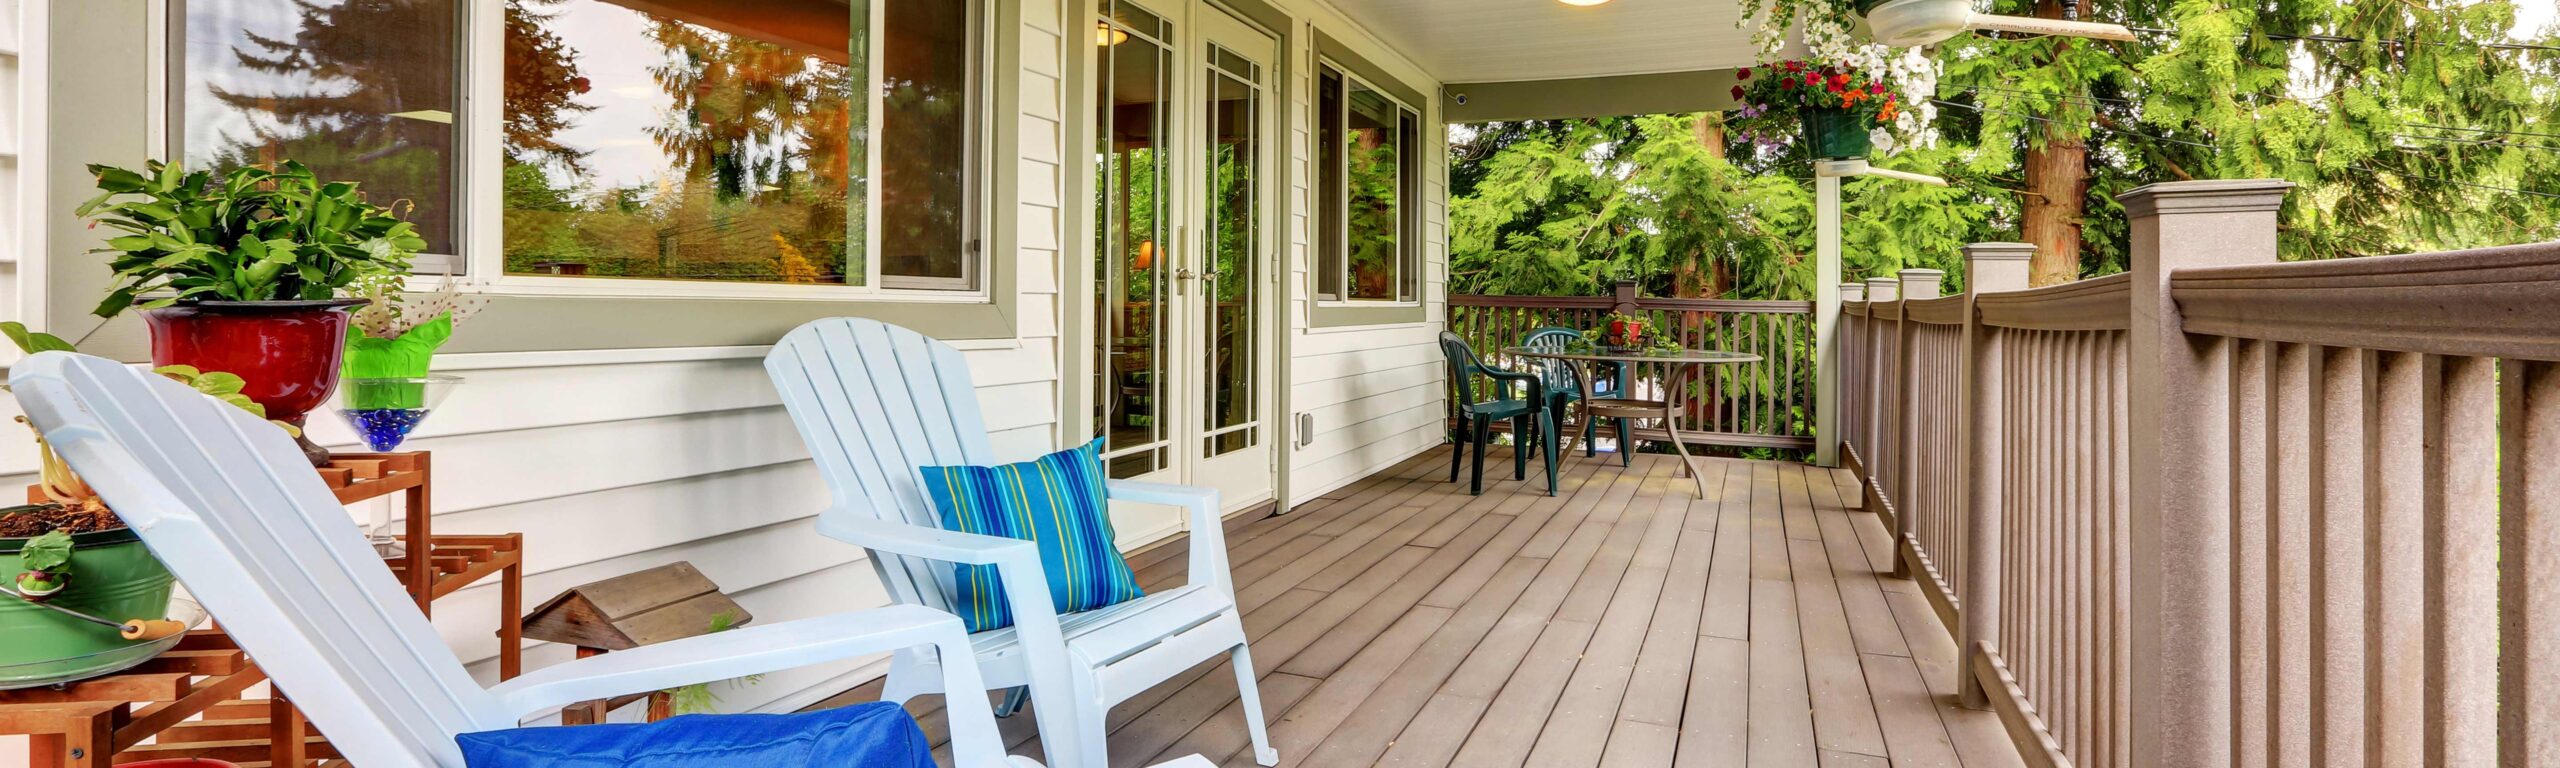 An inviting front porch with seating and potted plants.